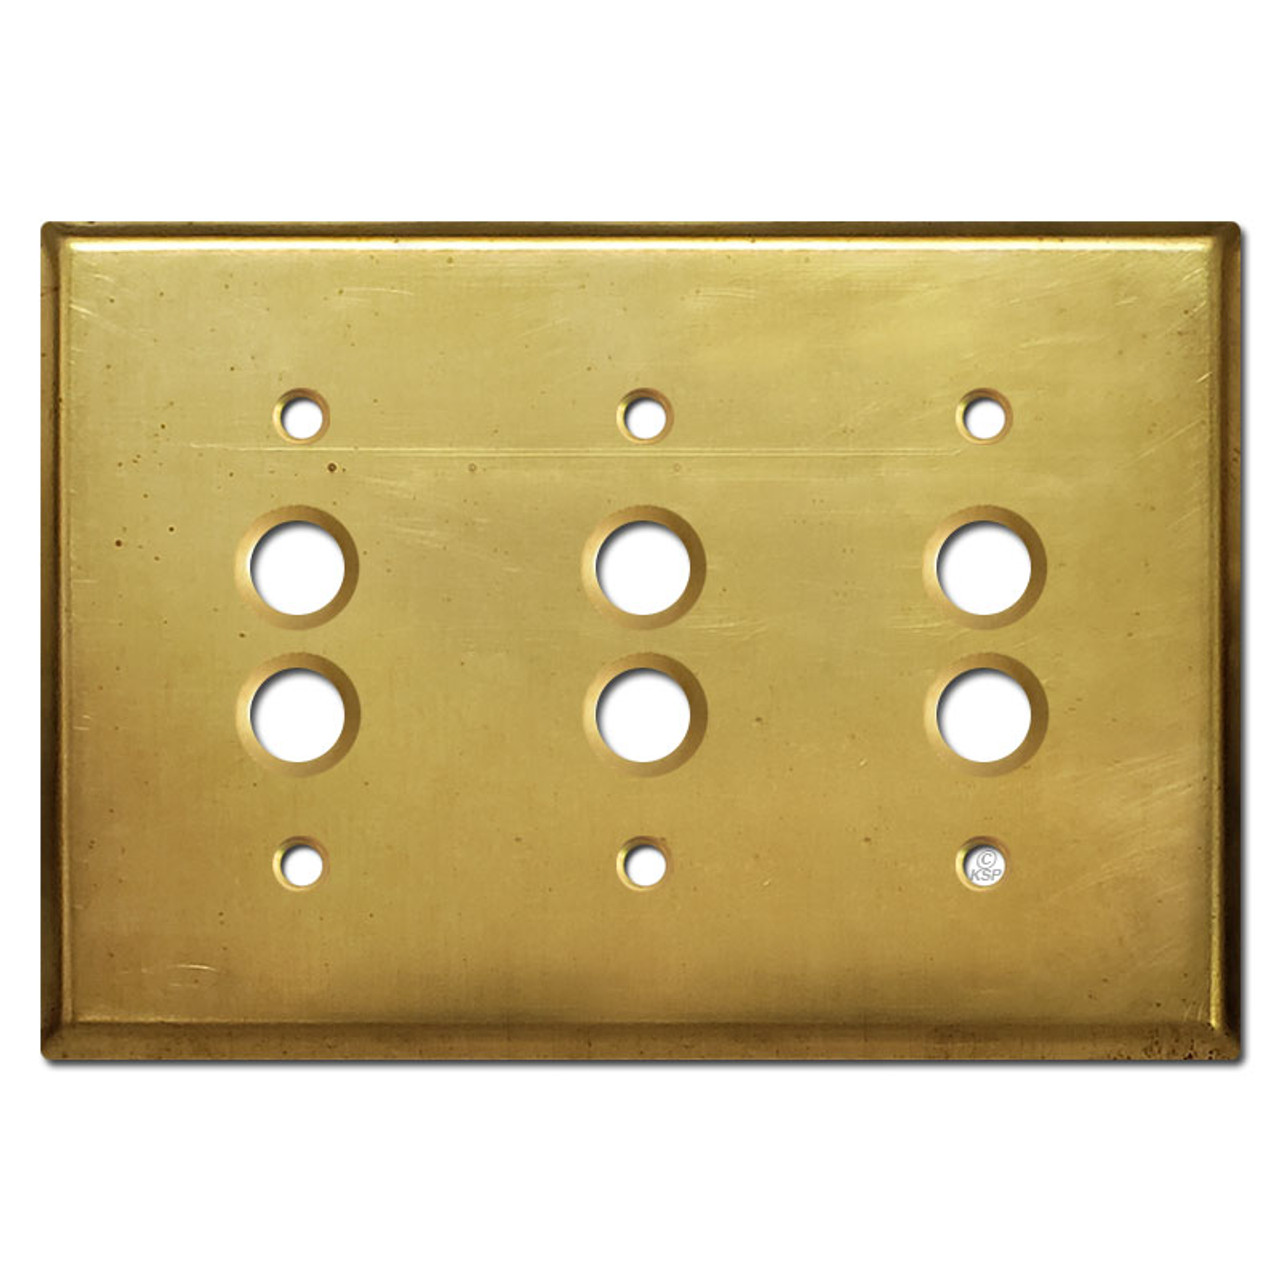 3 Gang Push Button Light Switch Cover - Raw Brass